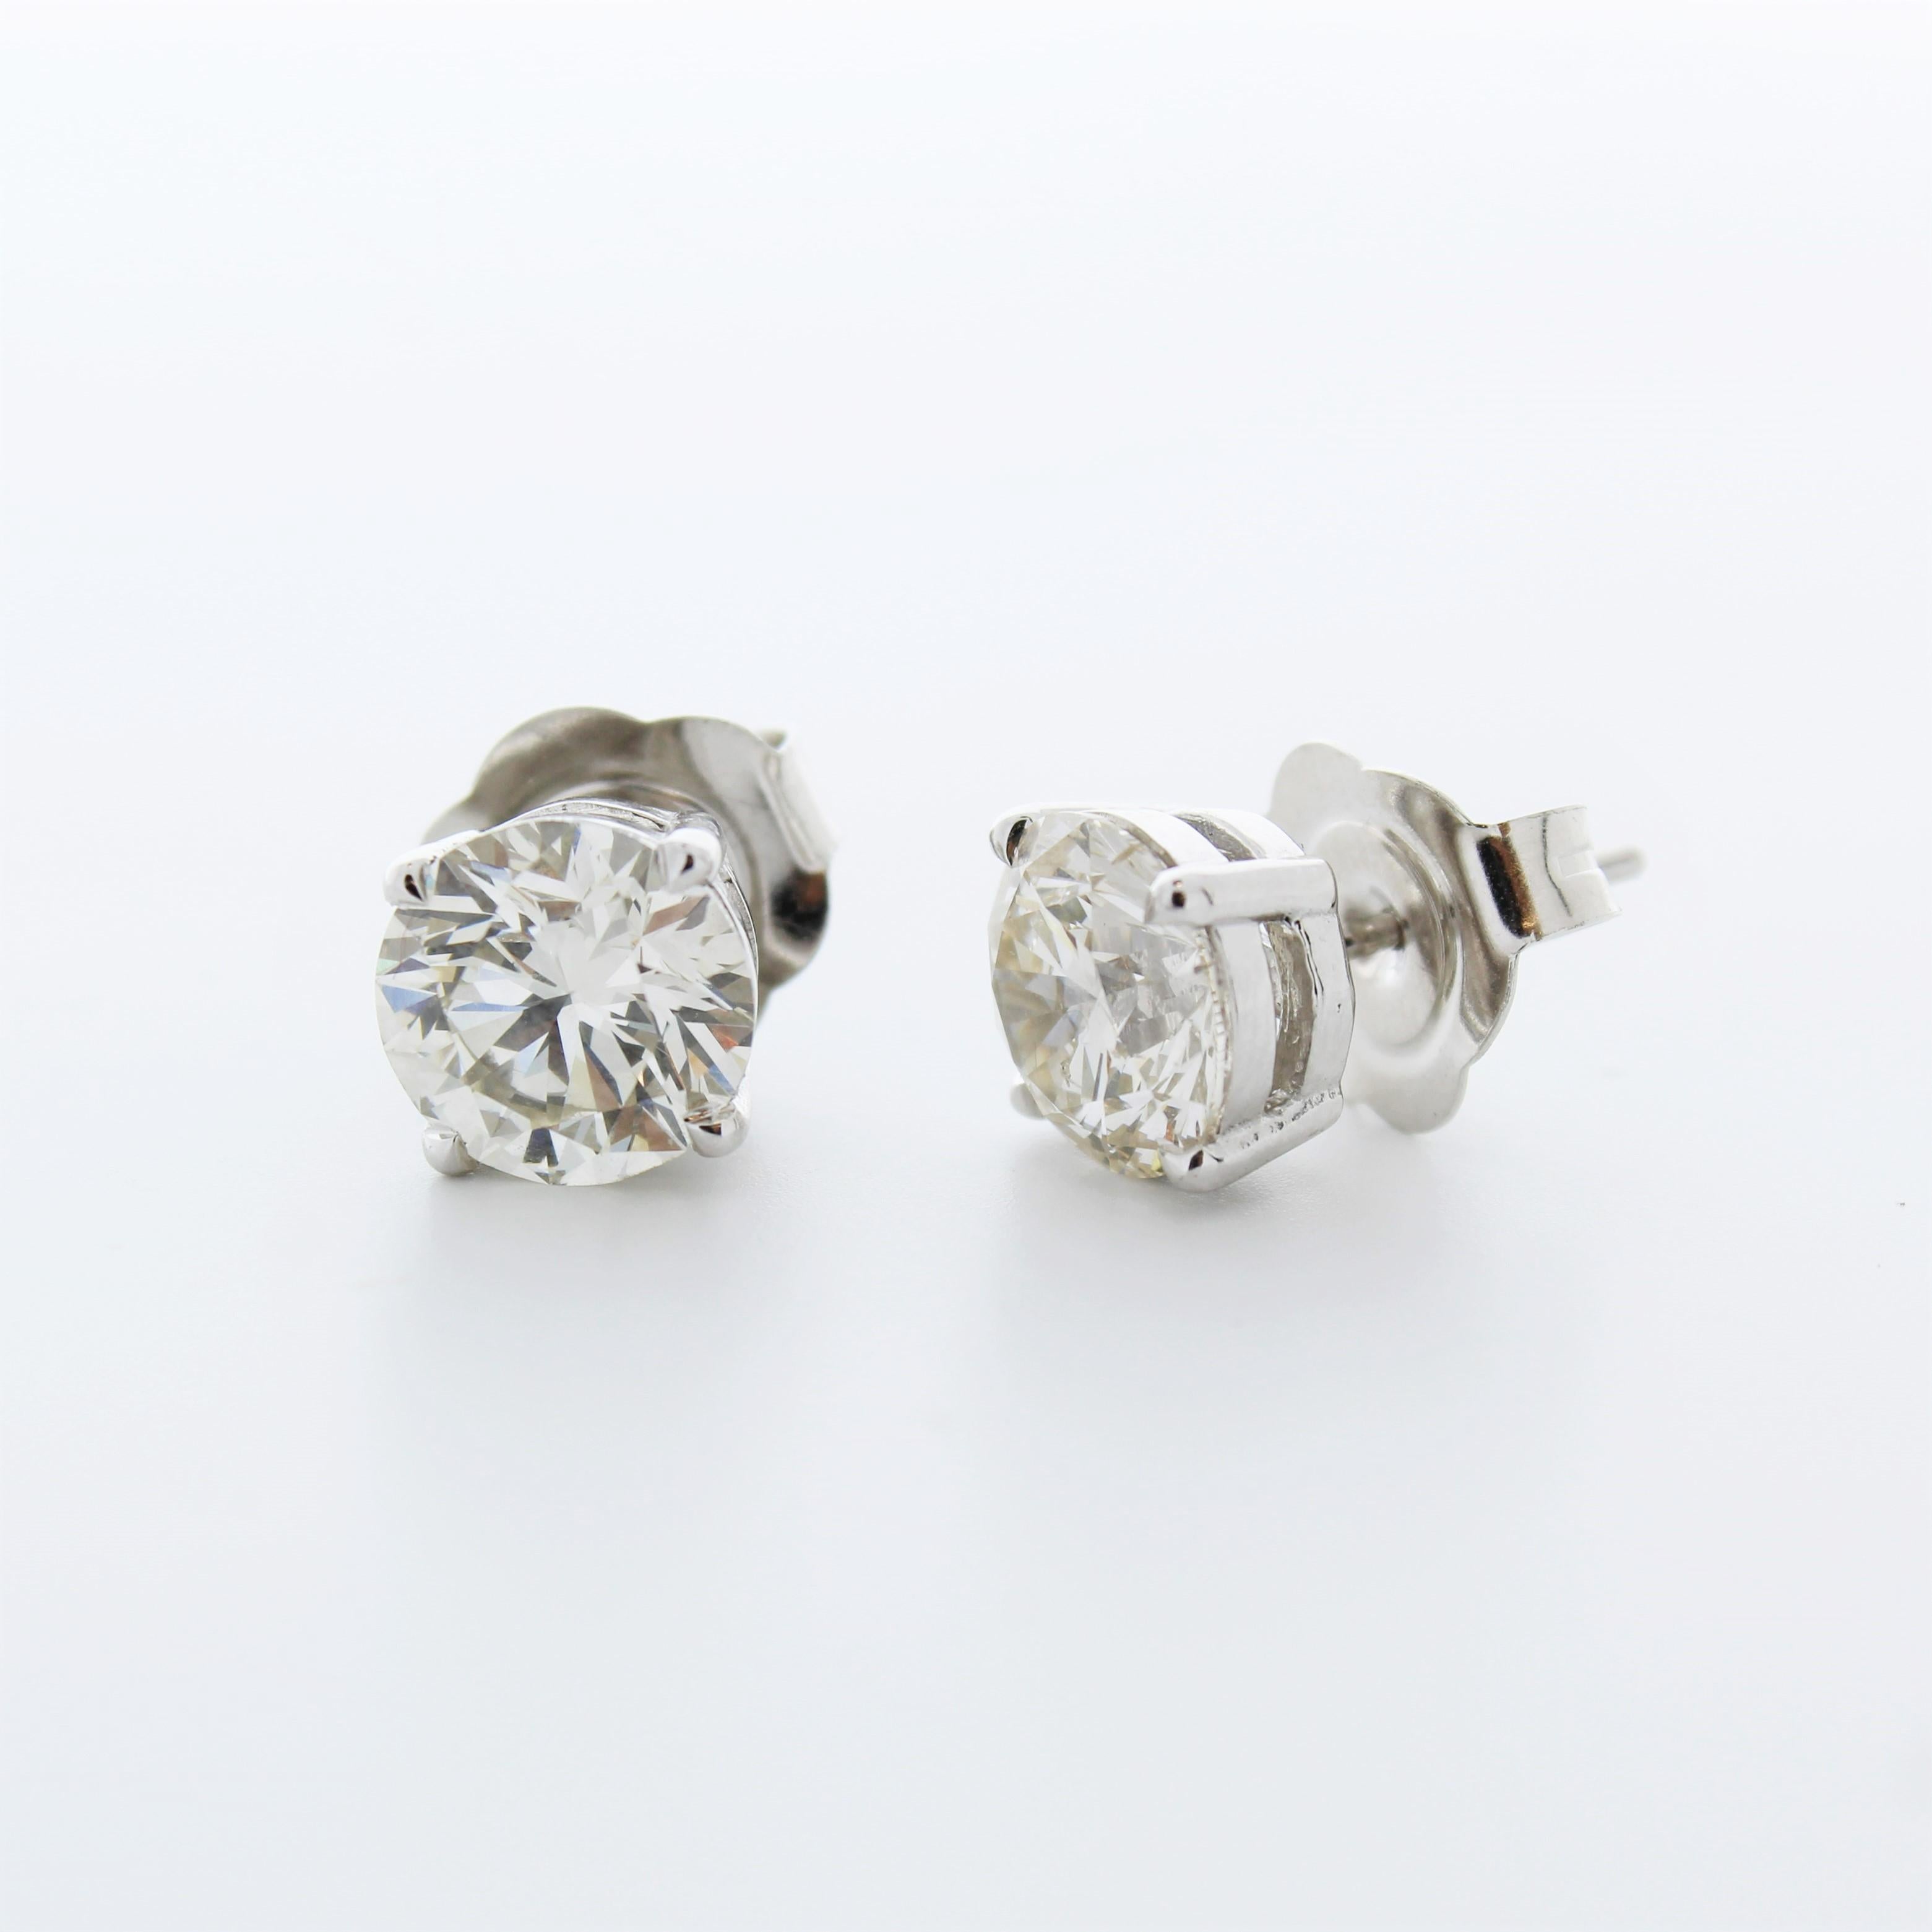 Contemporary 4.74 Total Carat Weight EGL Certified Round Diamond Studs In 14k White Gold For Sale